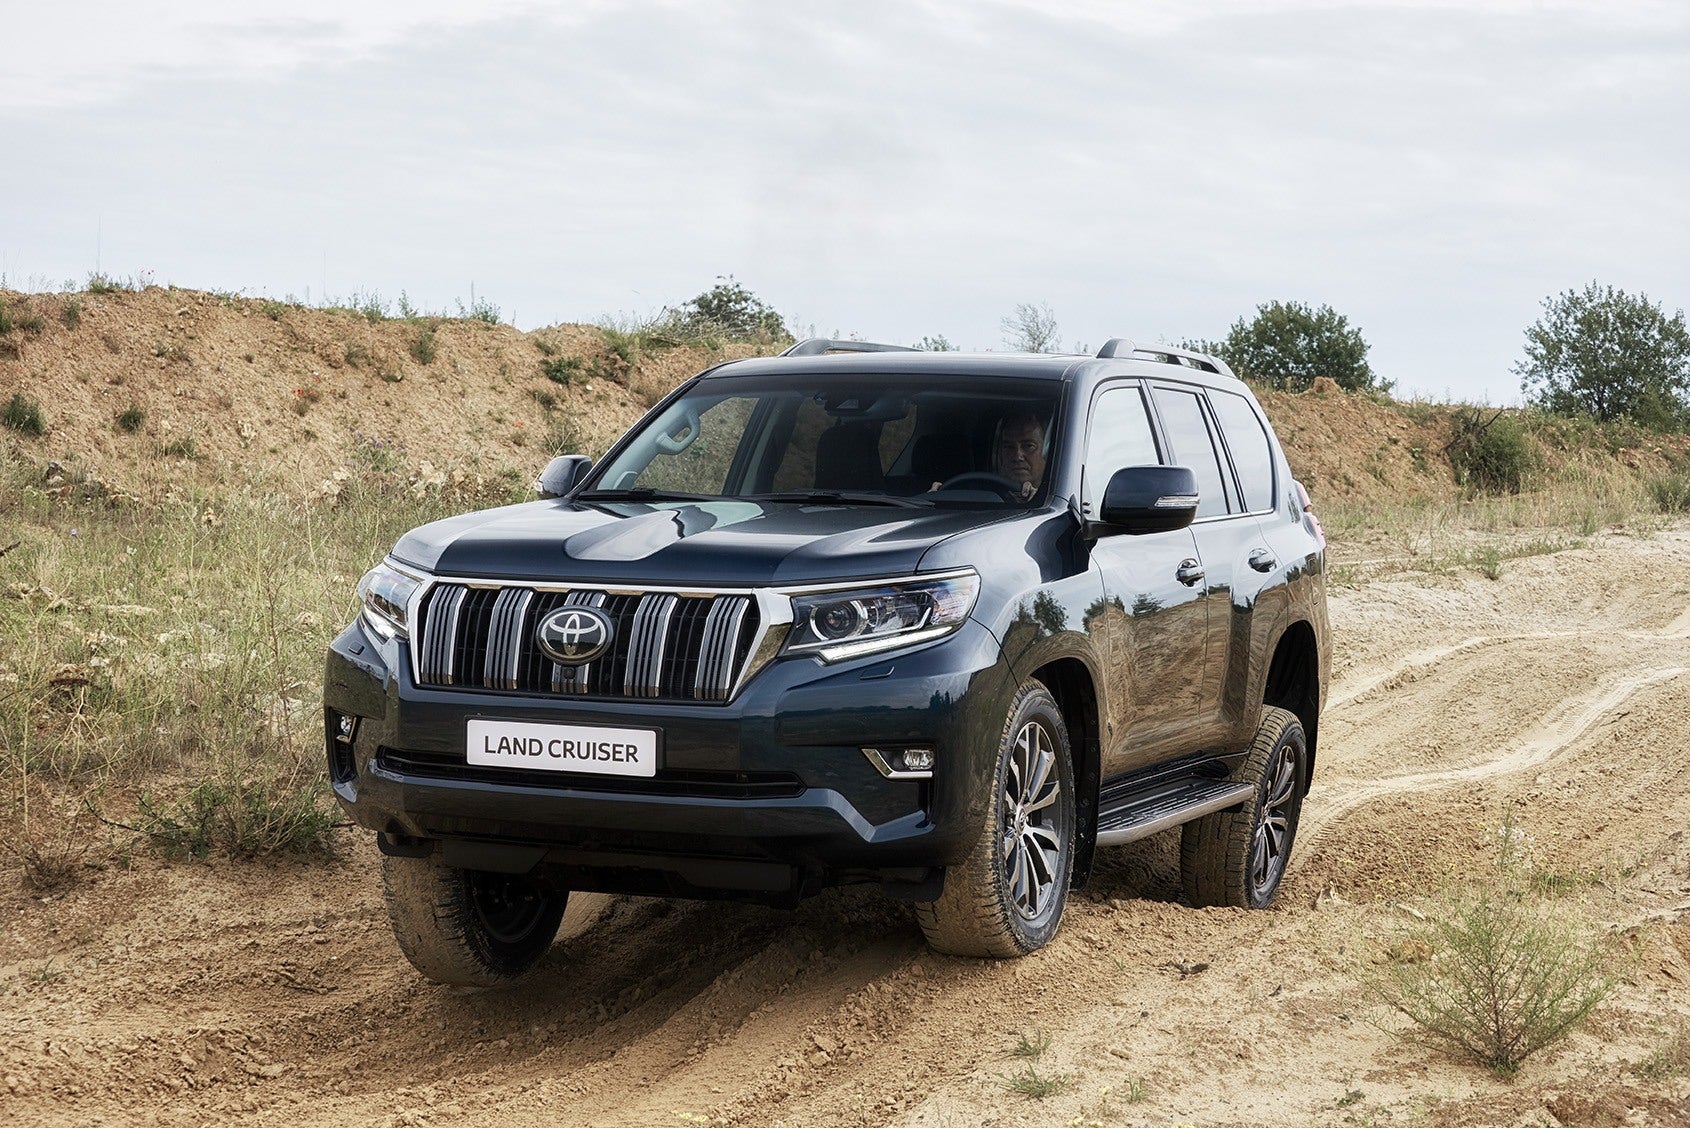 Toyota Land Cruiser Prado Refreshed with New Looks, More